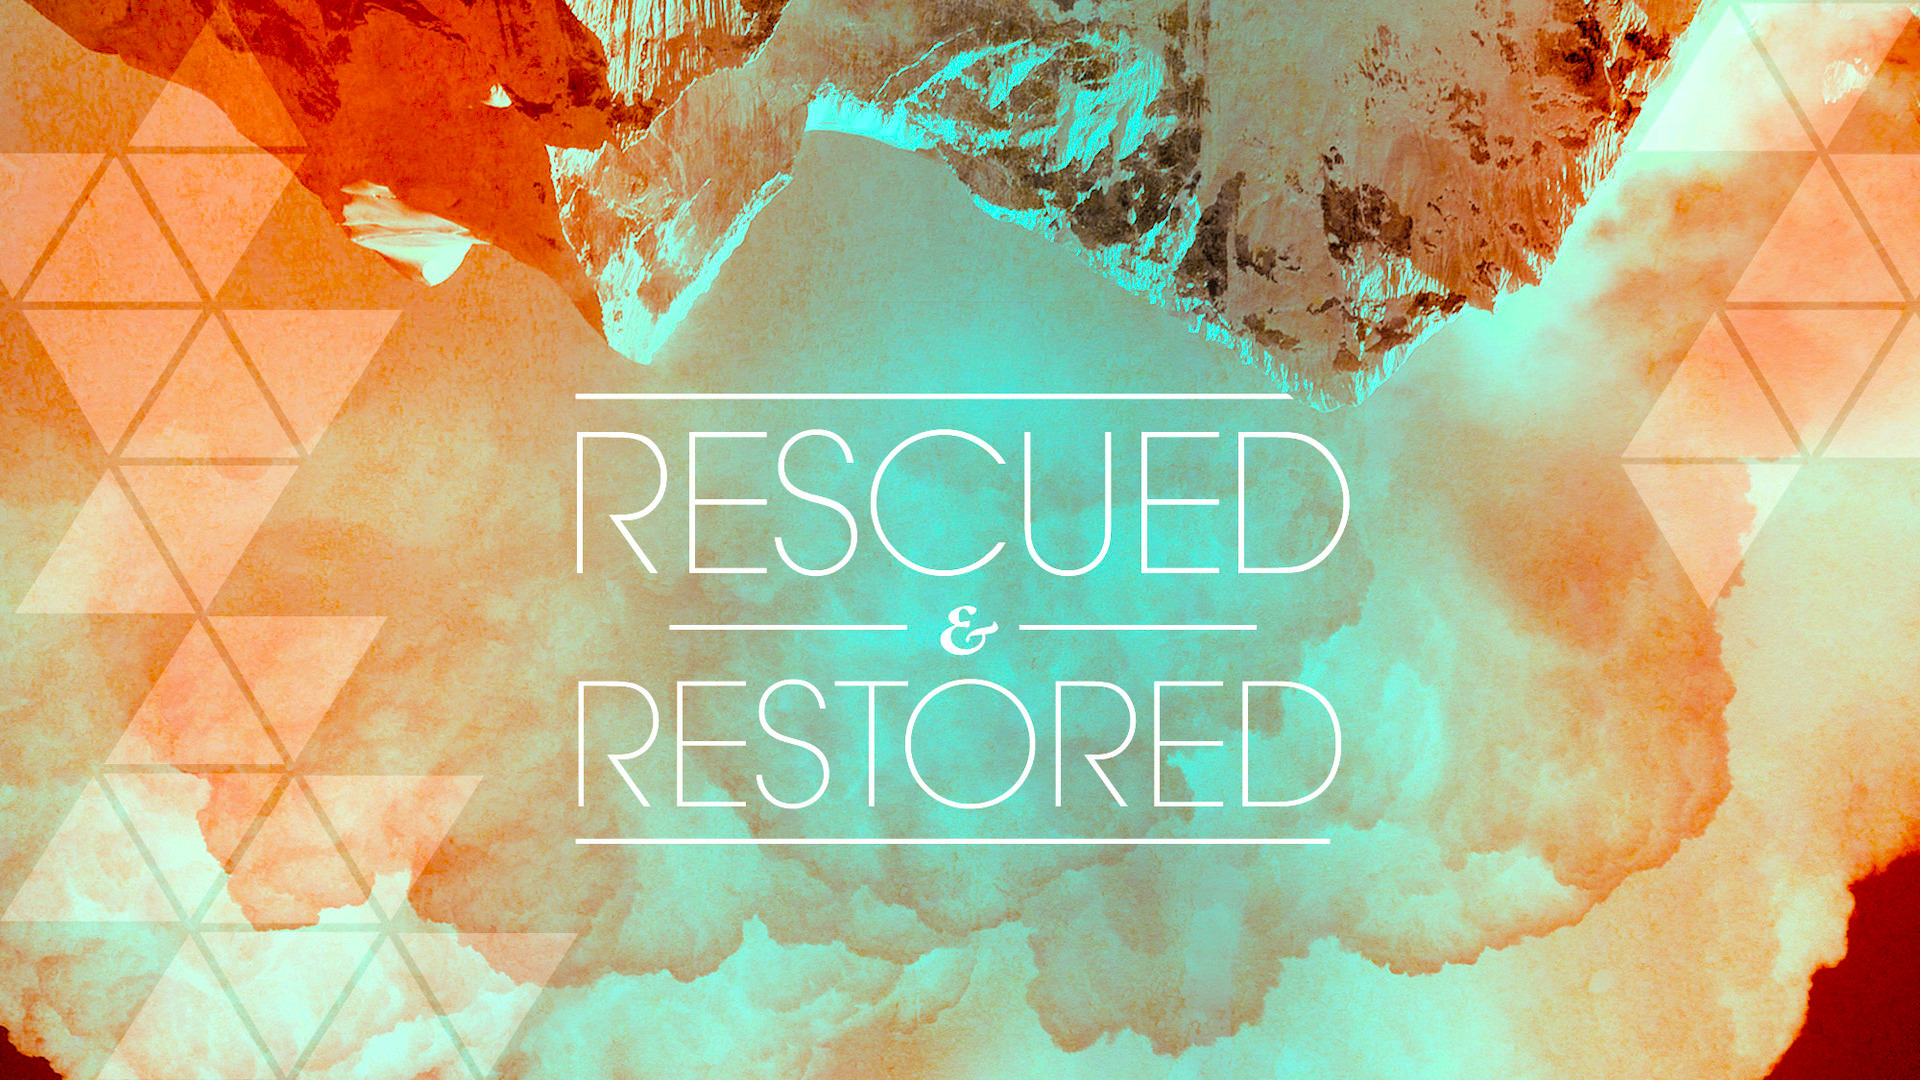 05-15-16 | Rescued & Restored | Who is in Control? | Mark Anderson